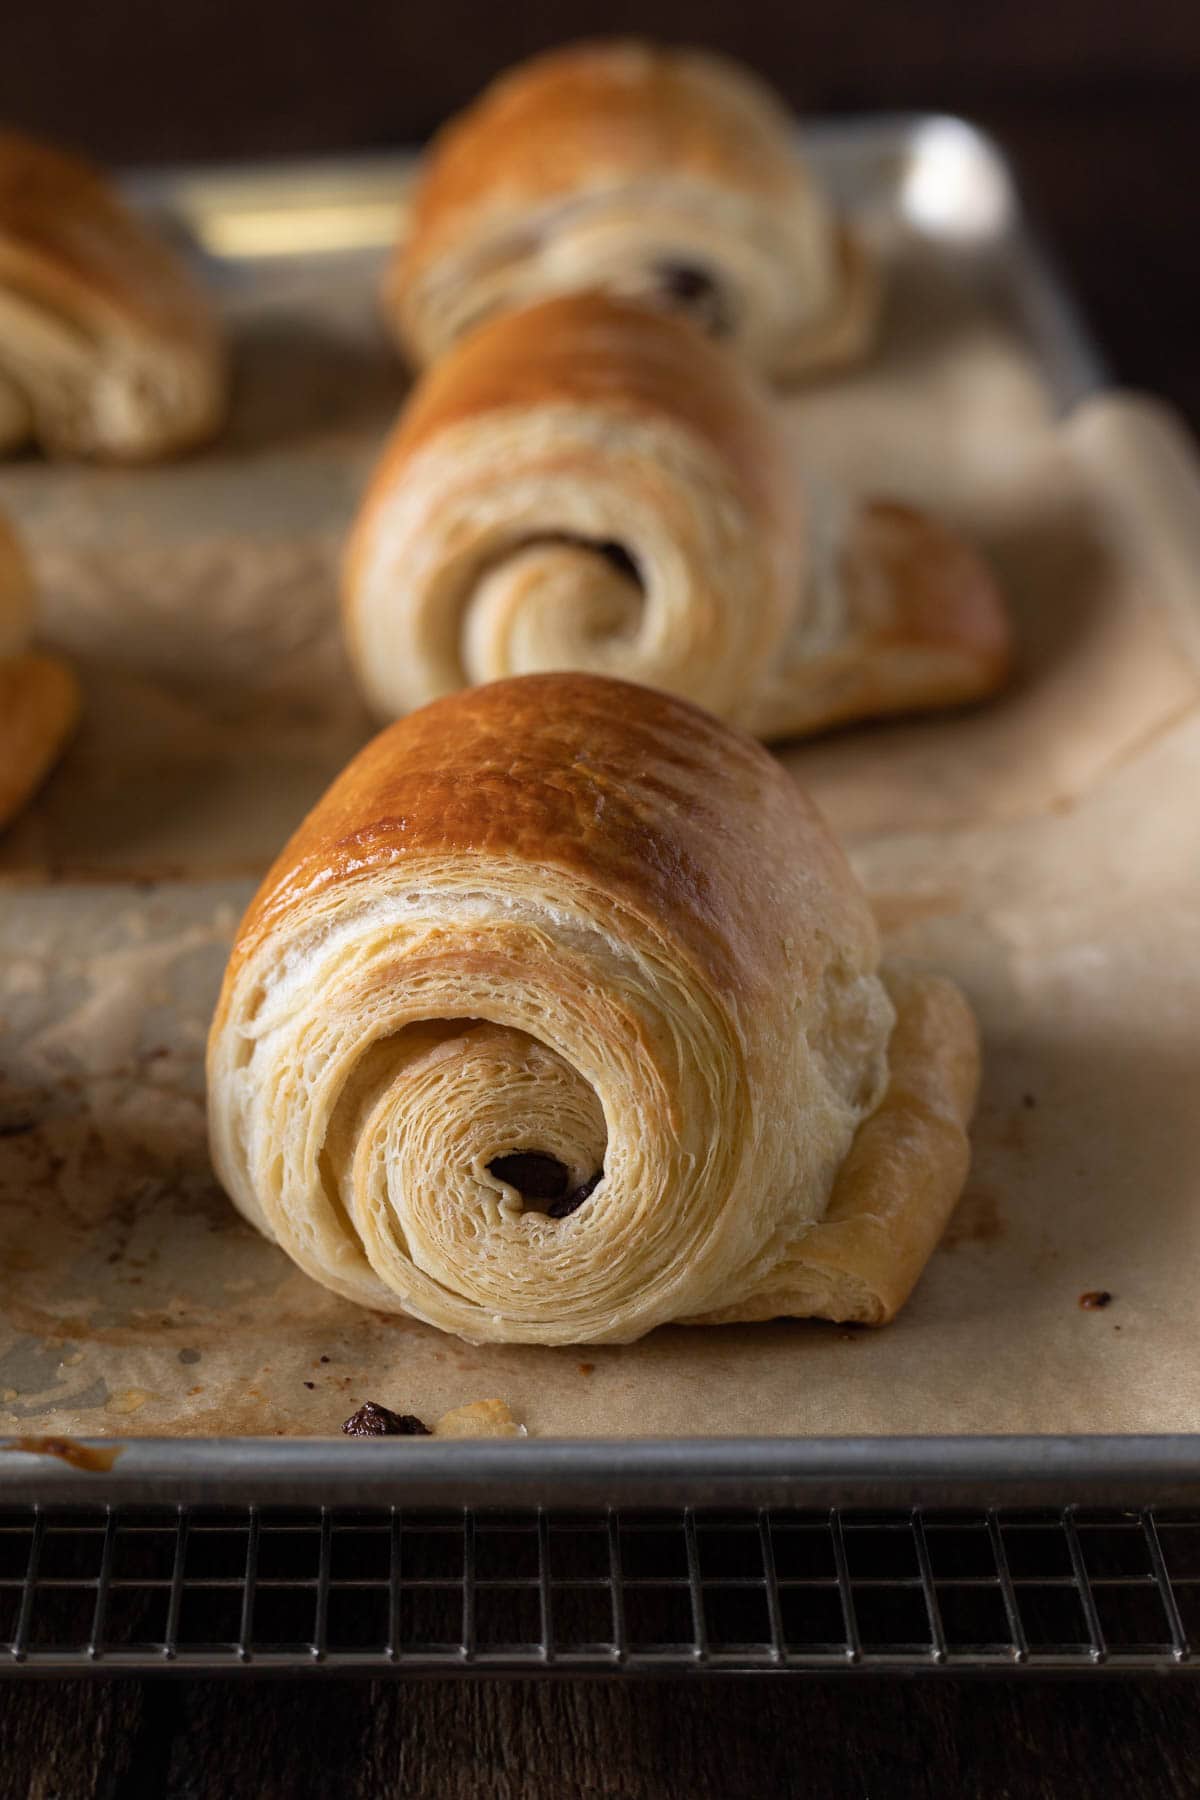 Chocolate croissants on a sheet pan